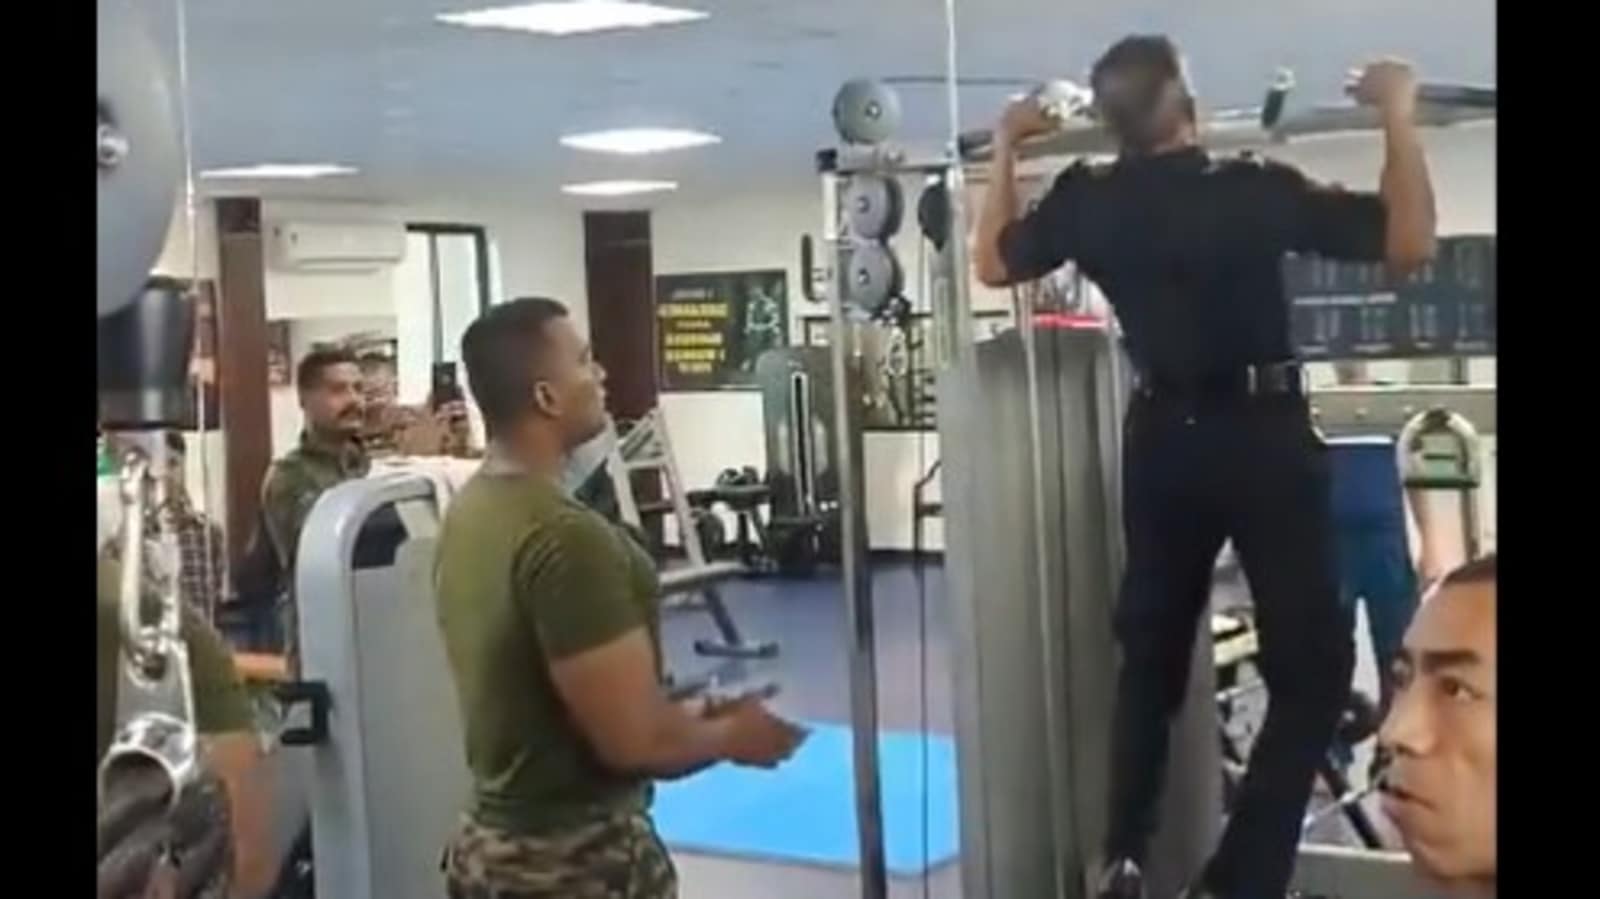 Major General stuns with 25 pull-ups in 60 seconds, internet applauds. Watch